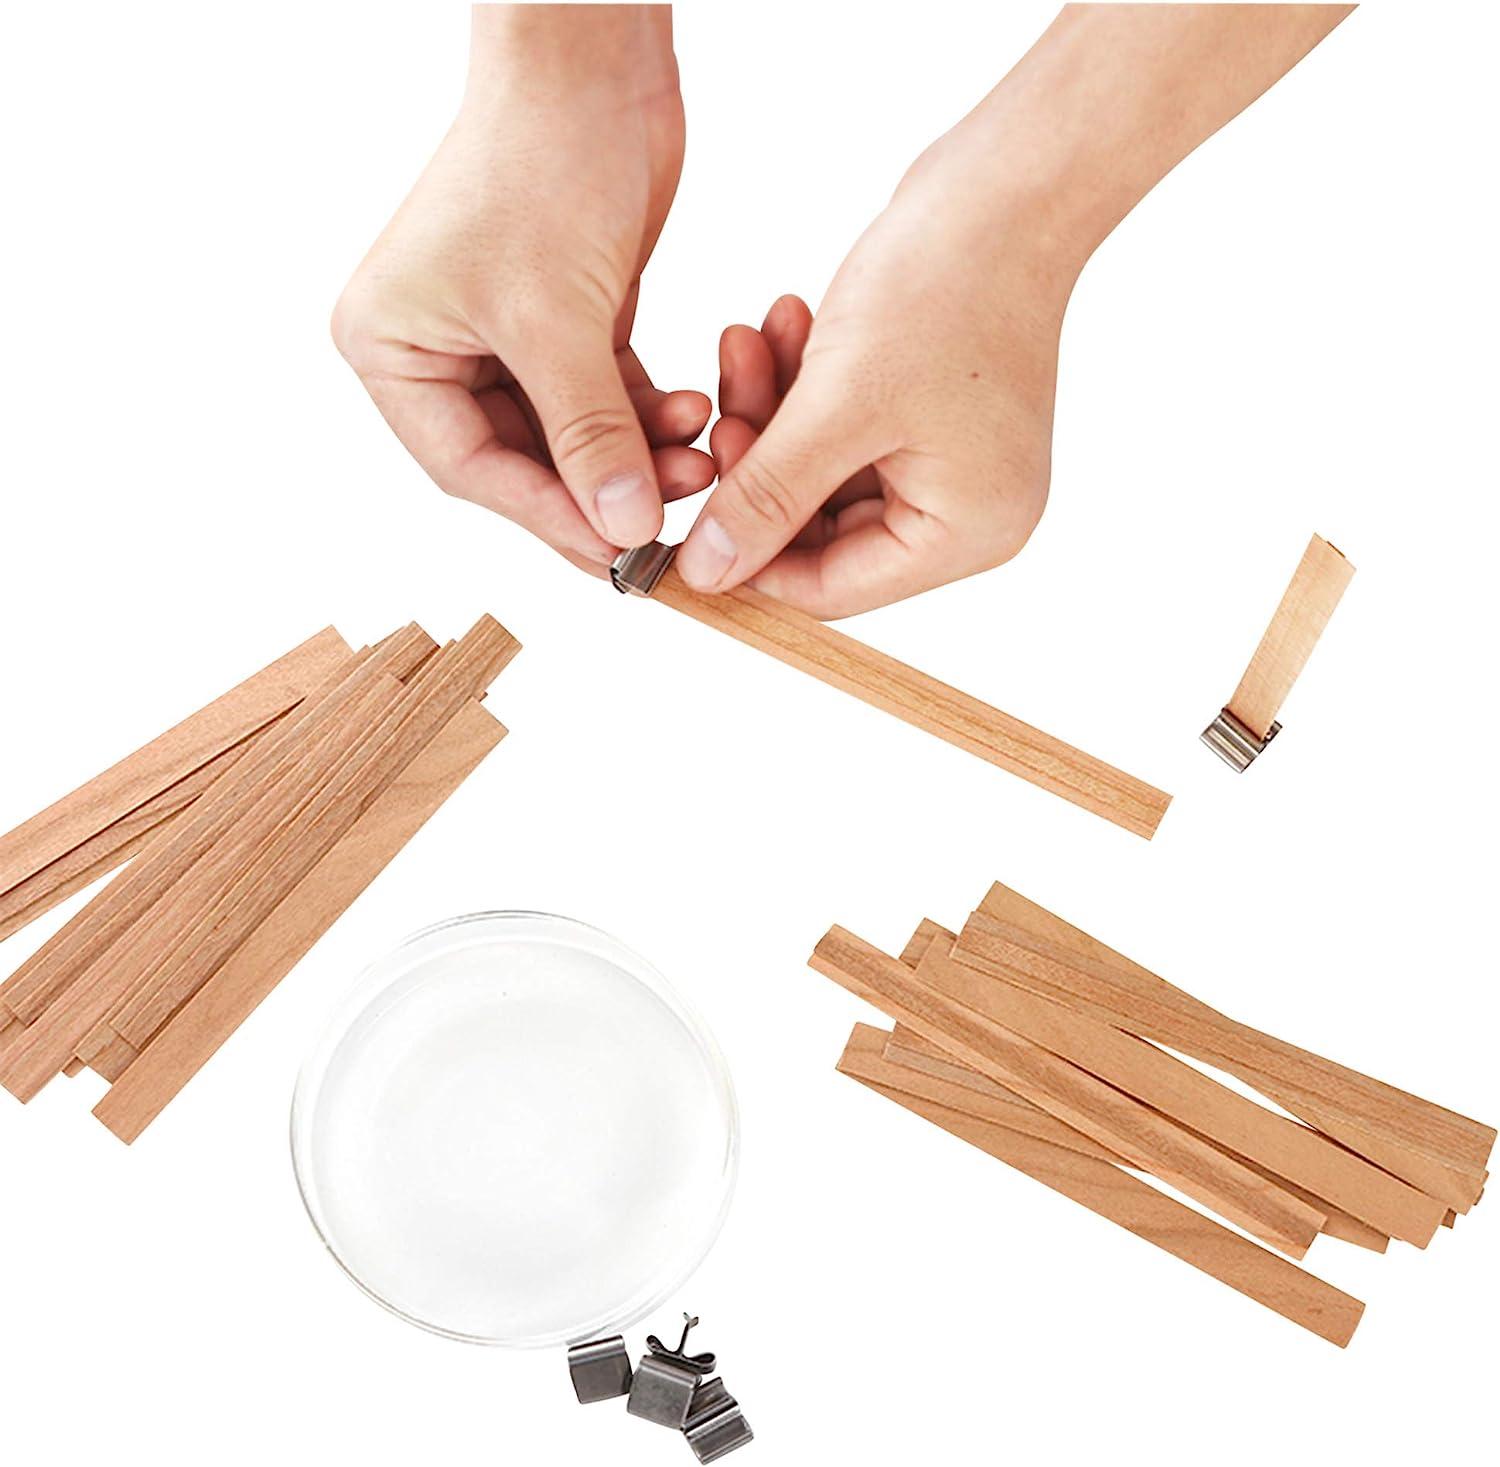 Wood Wicks for Candles Making - NOOR 50 Pieces Smokeless Wooden Wicks with  Booster. Crackling Wood Wick with Metal Clips for Candle Making and DIY